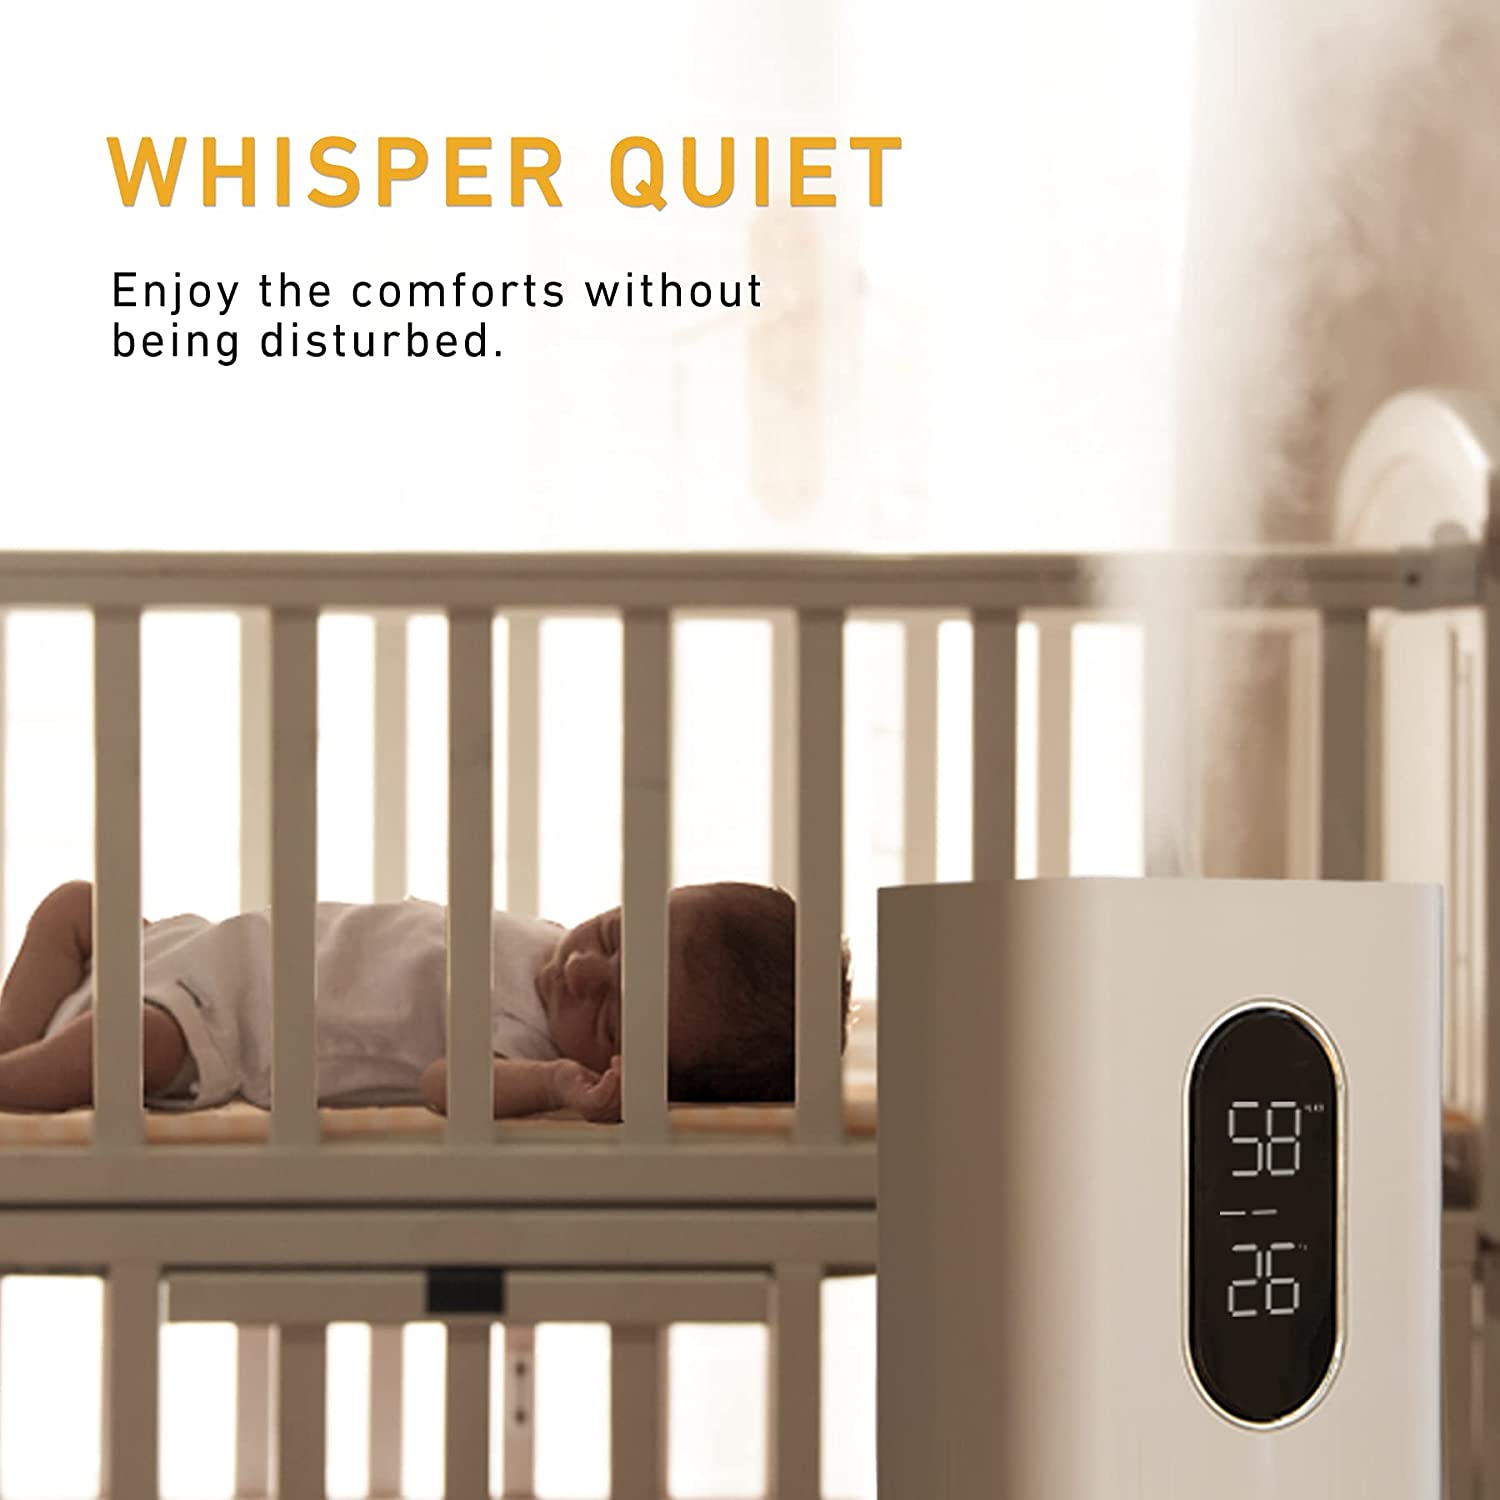 [MH-033]2.1Gal. Large Capacity Cool Mist Humidifier Top Fill Vaporizer for baby room Yoga